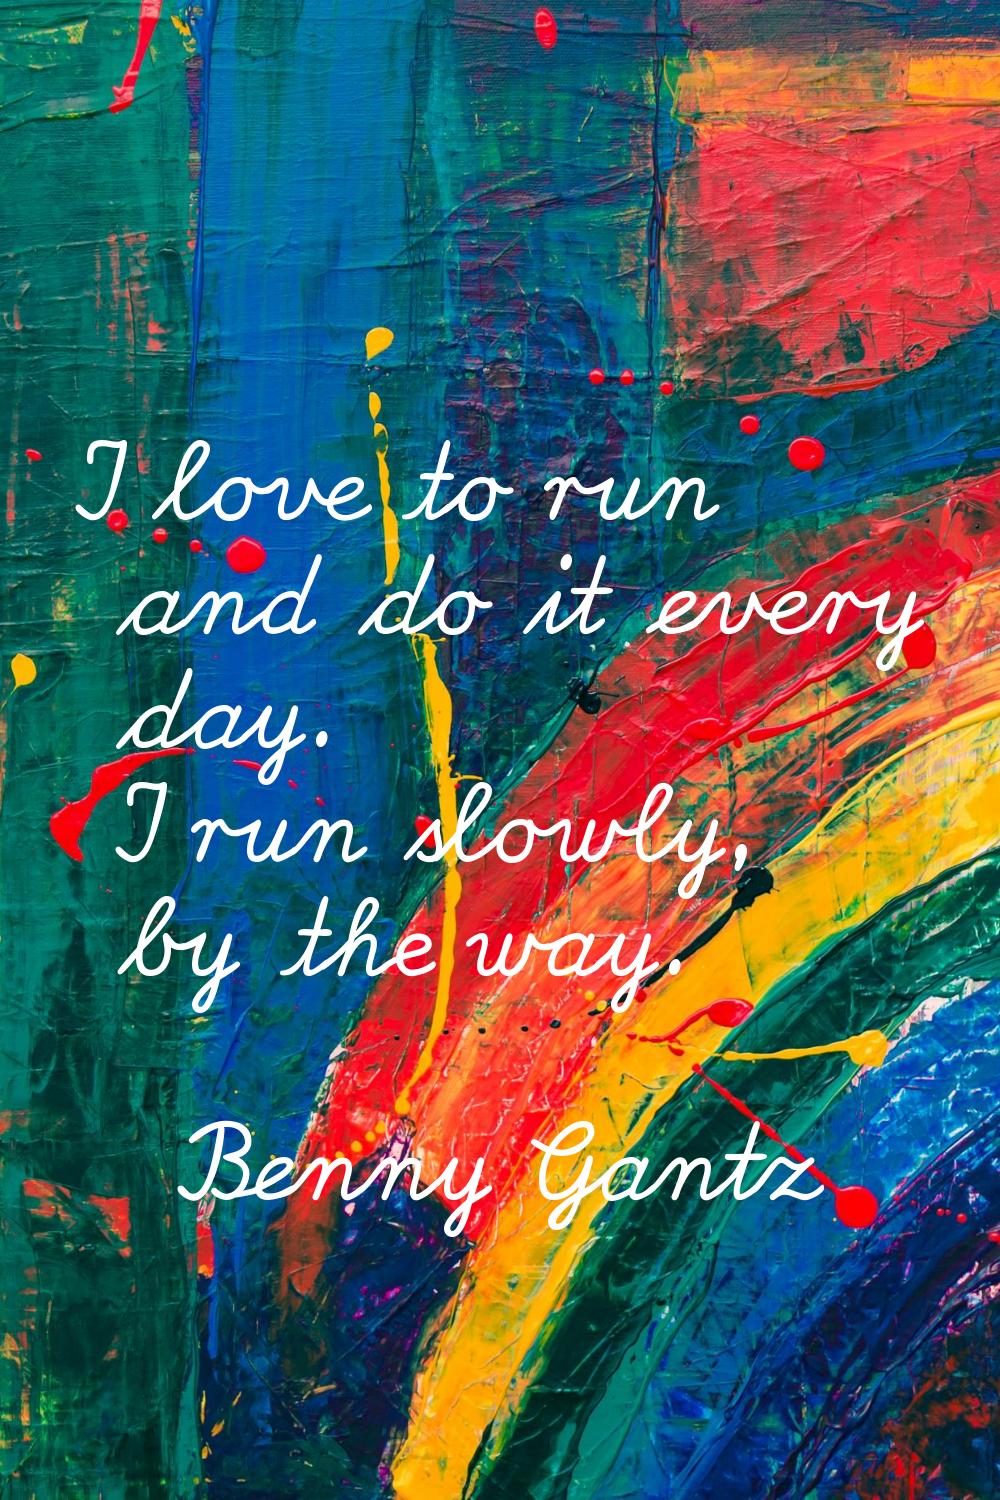 I love to run and do it every day. I run slowly, by the way.